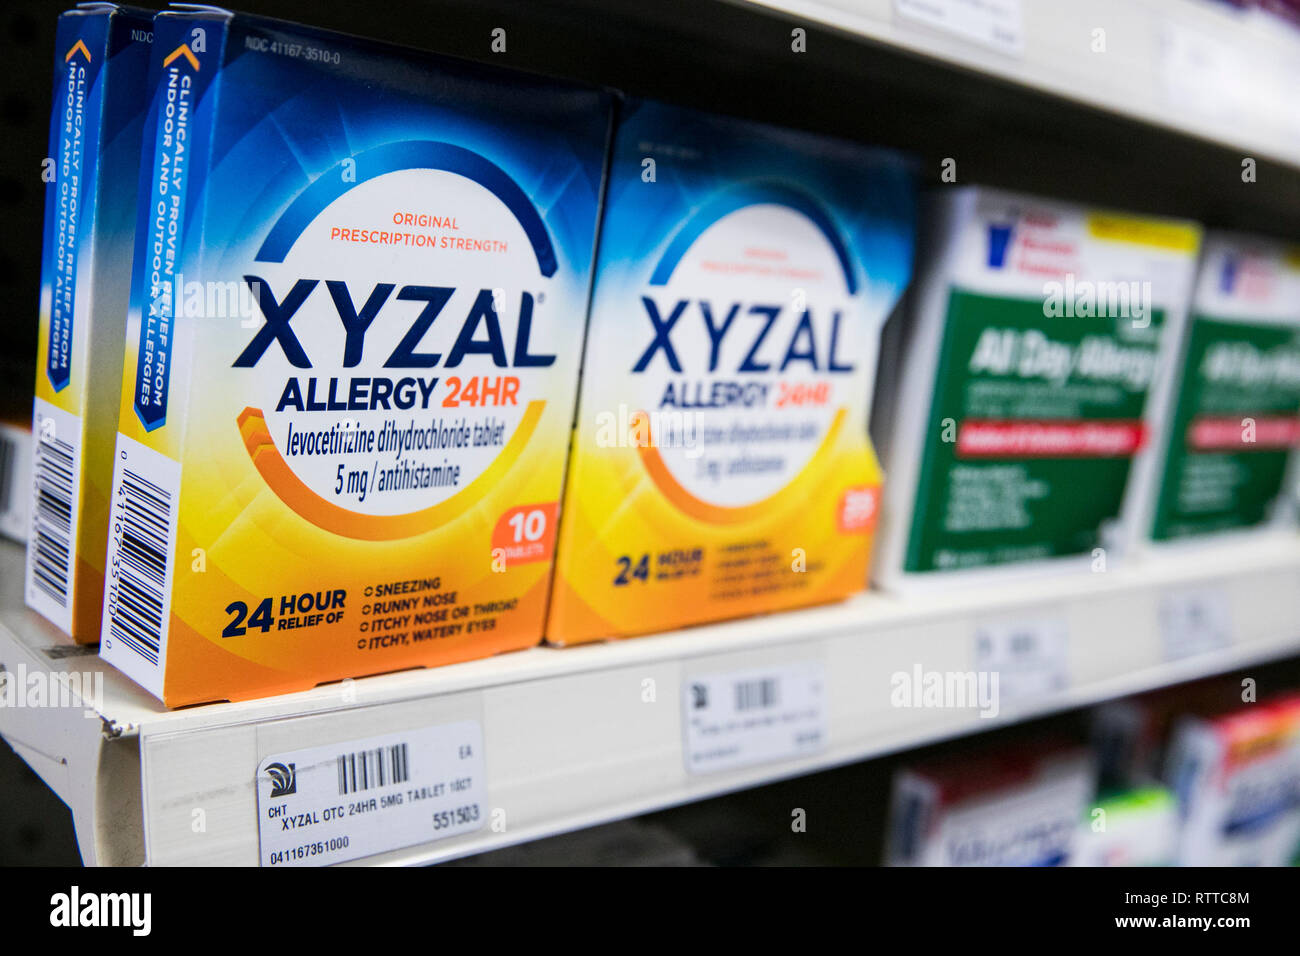 Xyzal Allergy over-the-counter medicine photographed in a pharmacy. Stock Photo